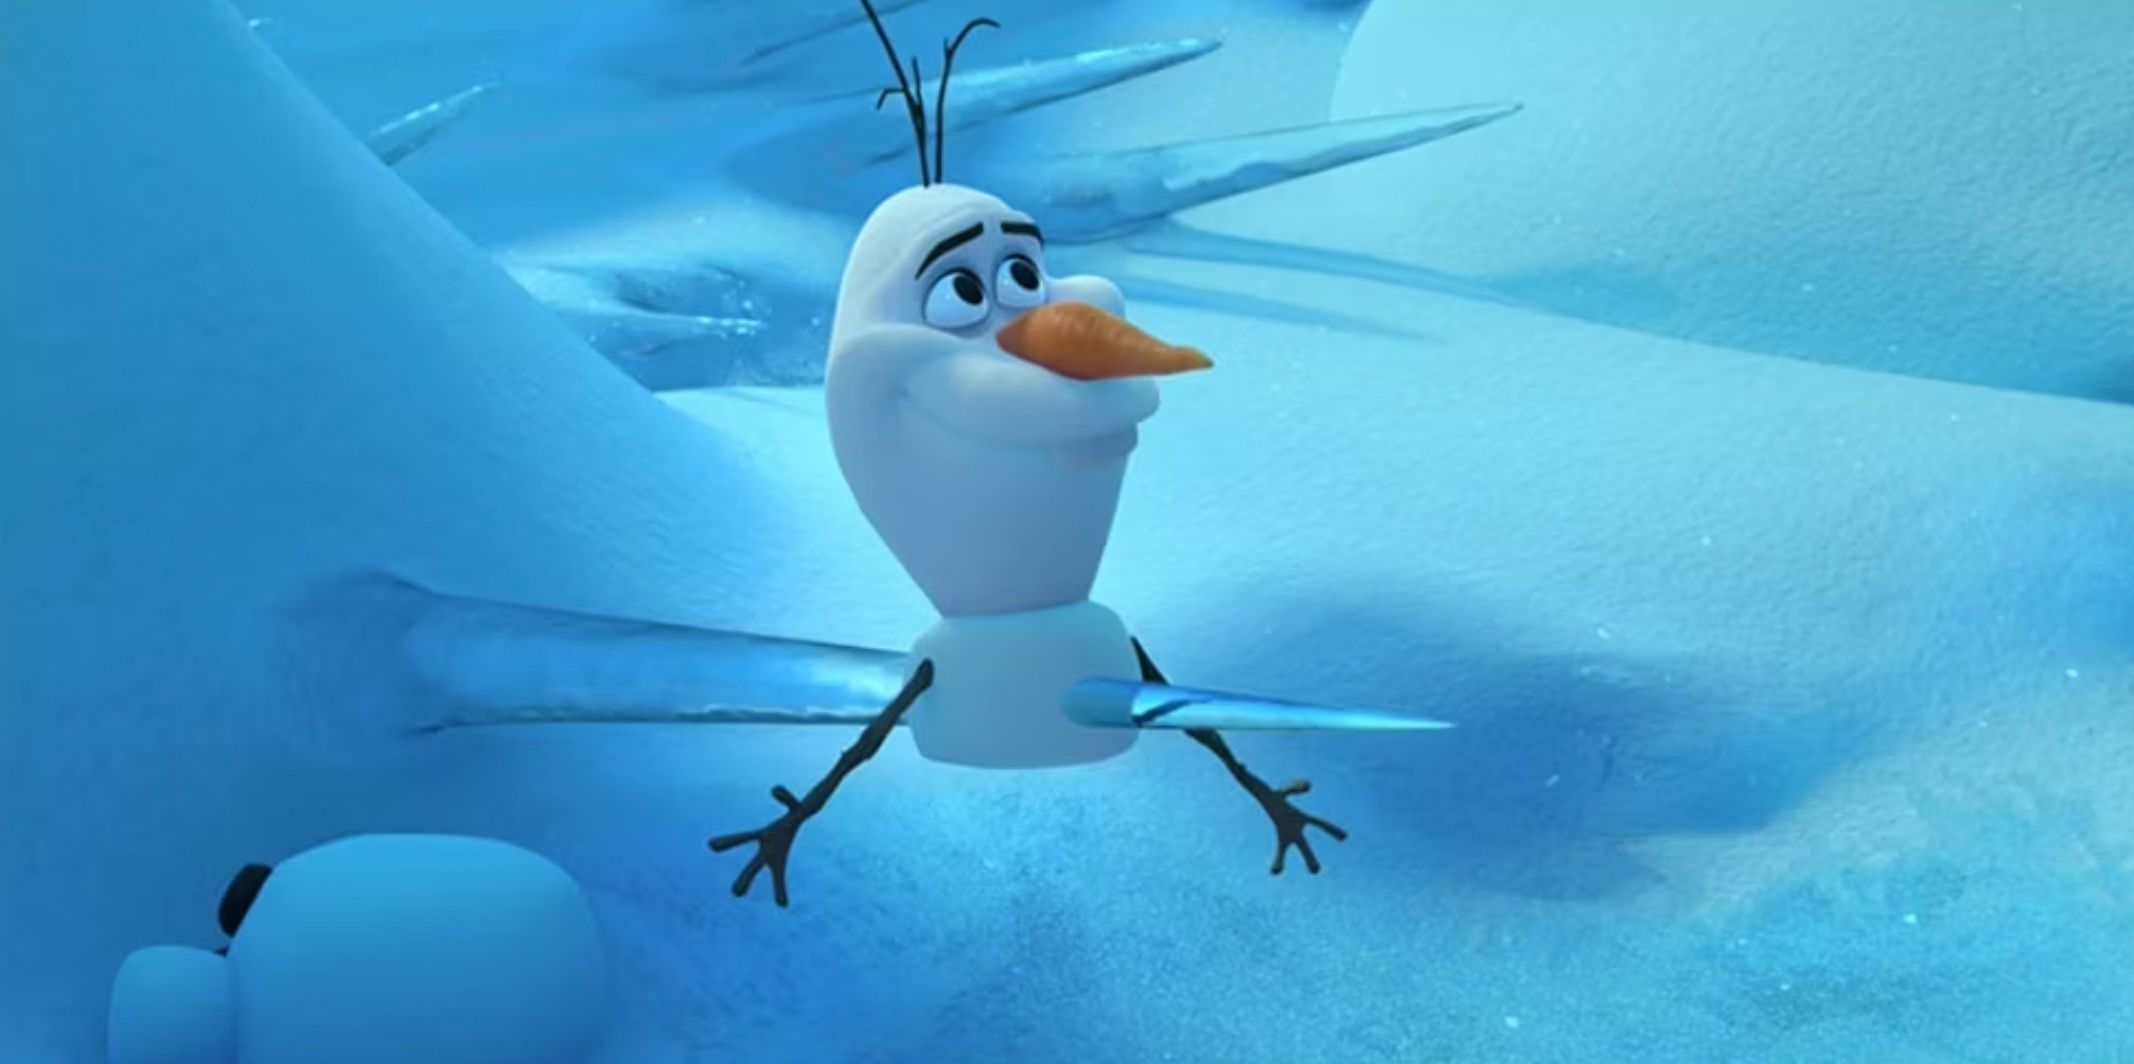 Olaf impaled by an icicle in Frozen